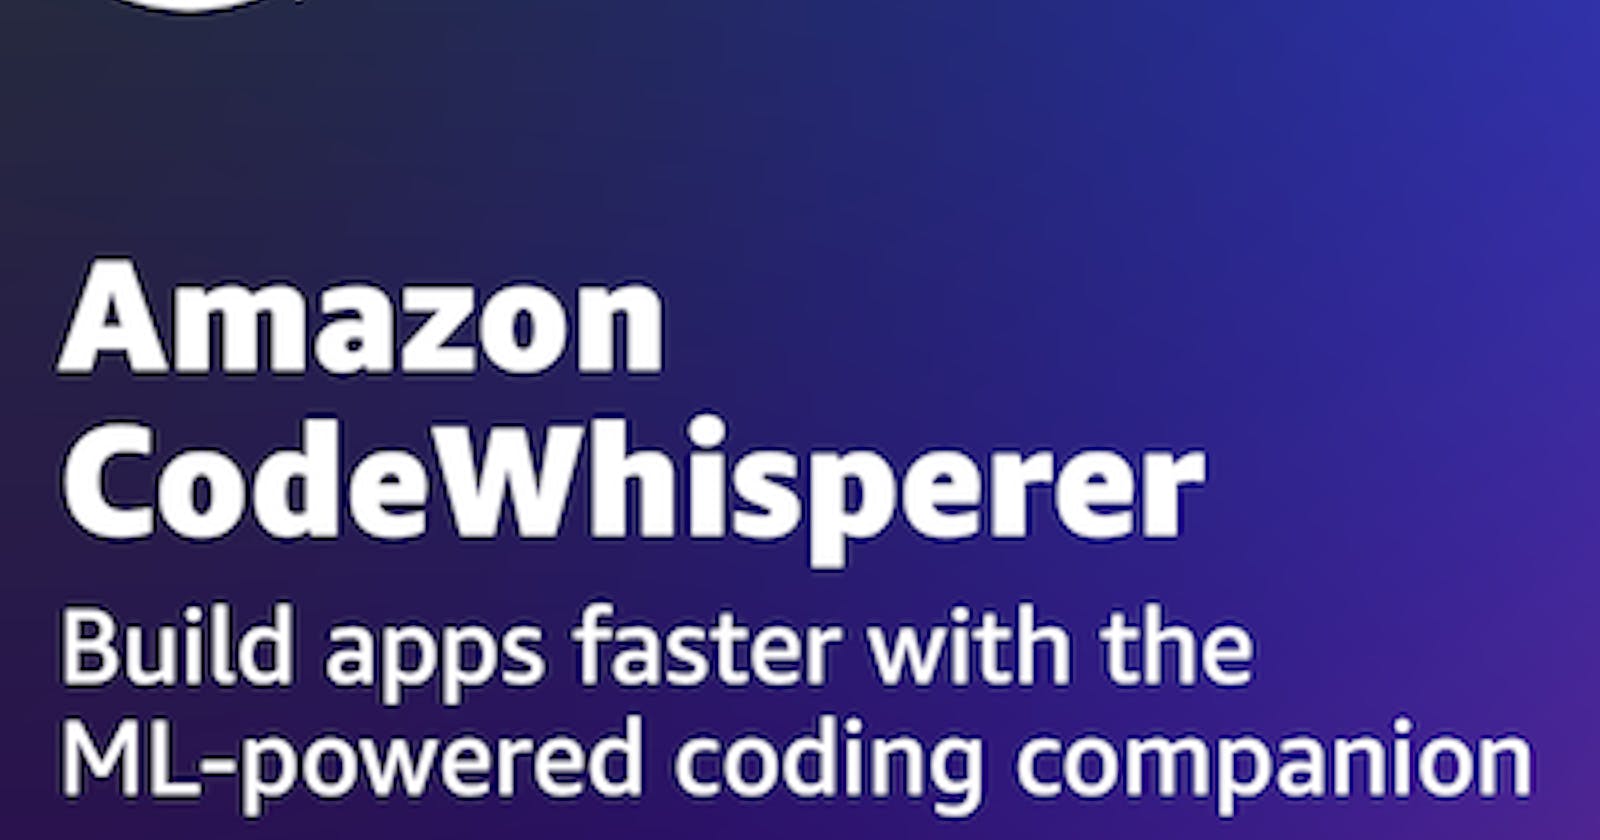 Coding just got better with Amazon CodeWhisperer